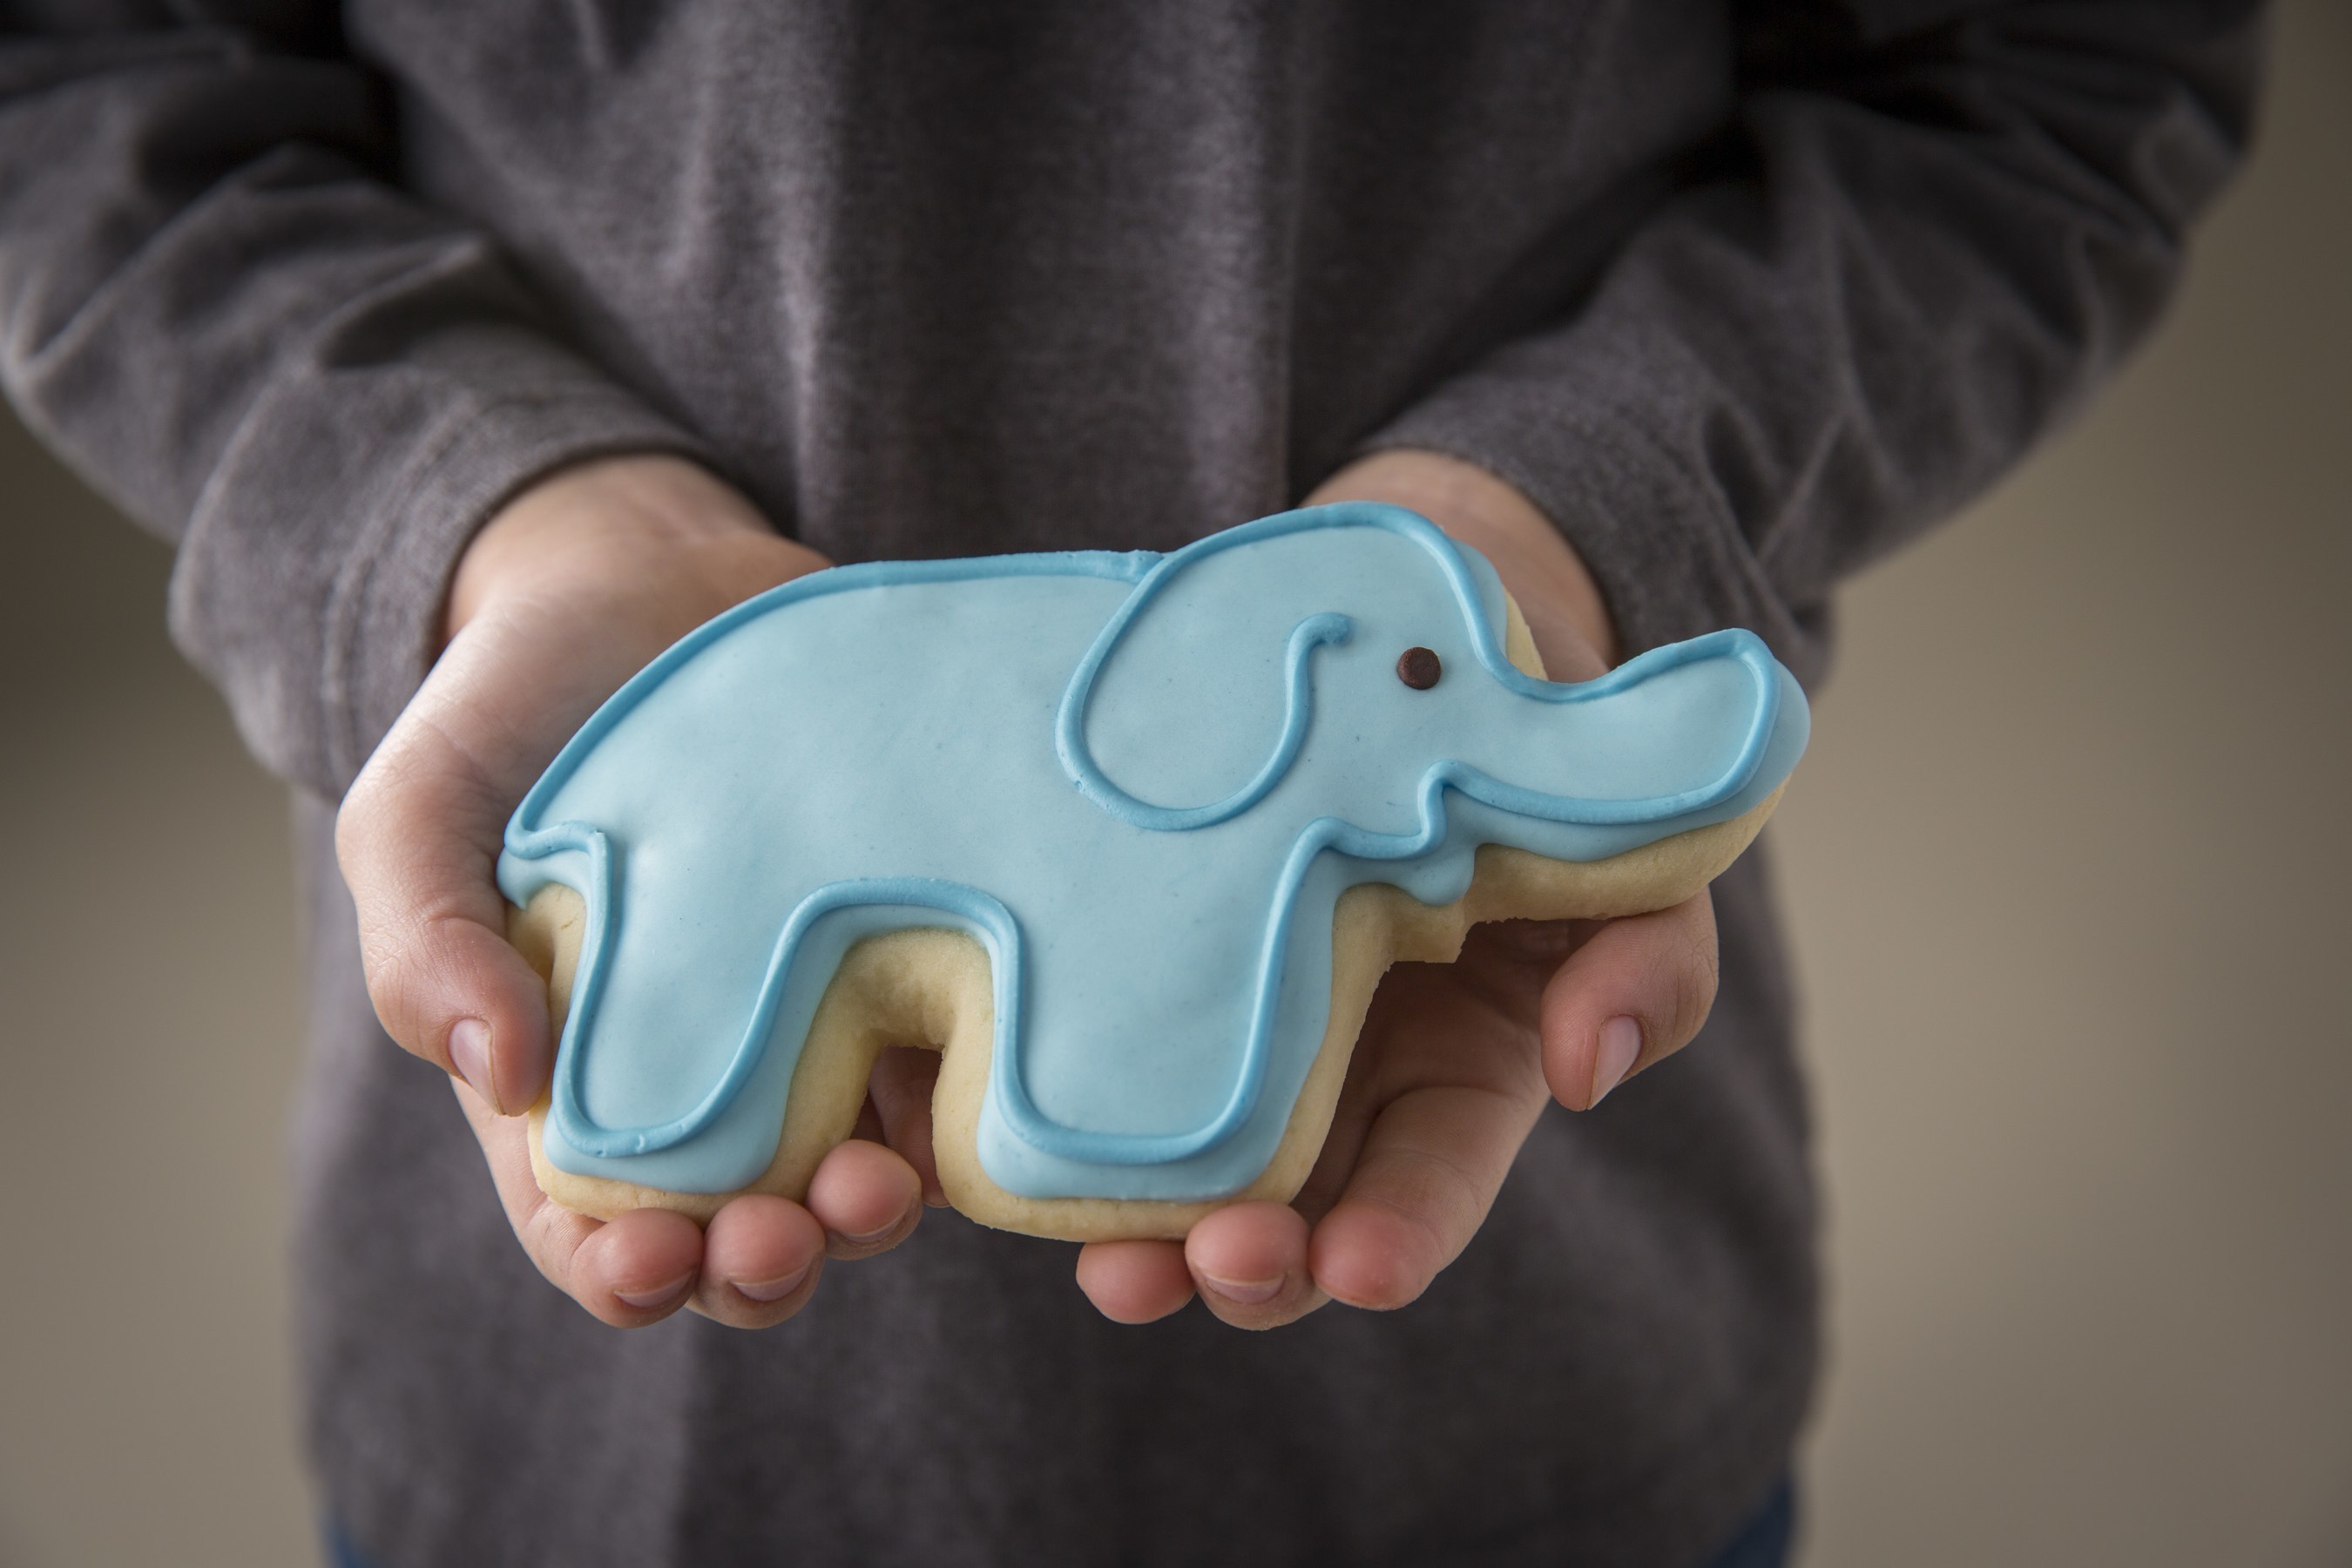 Throughout the month of September, all 52 Kneaders locations throughout the Western region will be selling elephant-shaped sugar cookies. One-hundred percent of the sales will go toward groundbreaking research into elephant DNA that may unlock the cure to childhood cancer.